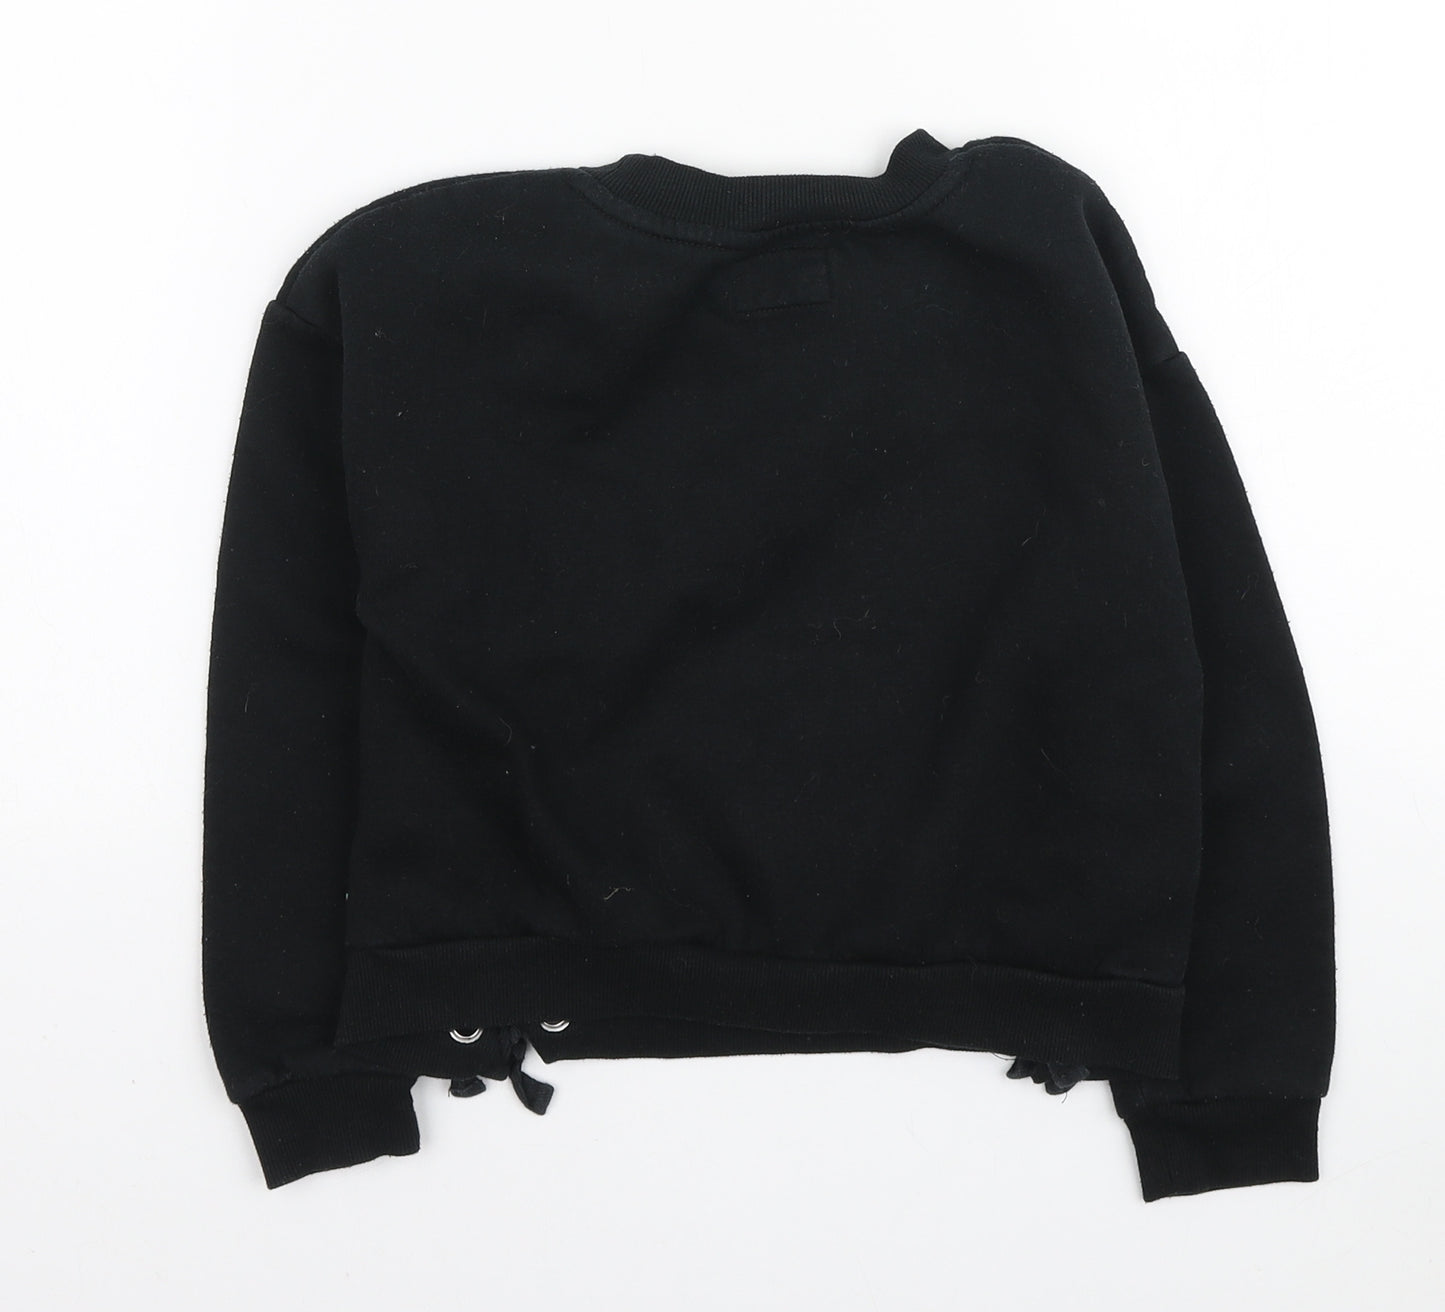 Primark Girls Black Polyester Pullover Sweatshirt Size 8-9 Years Pullover - #UNLIMITED